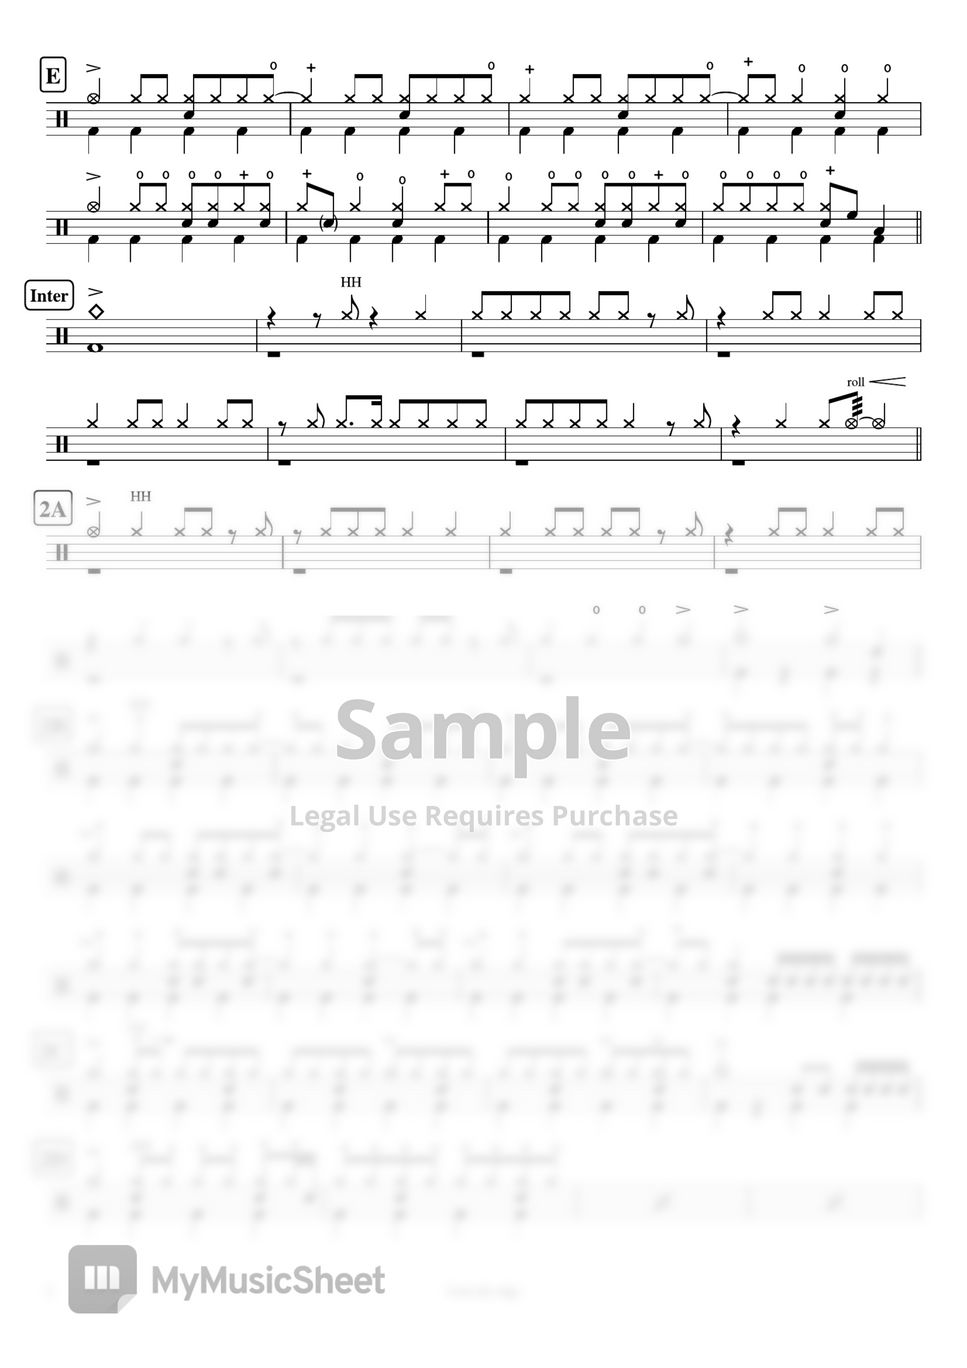 FictionJunction feat.LiSA - from the edge by Cookai's J-pop Drum sheet music!!!